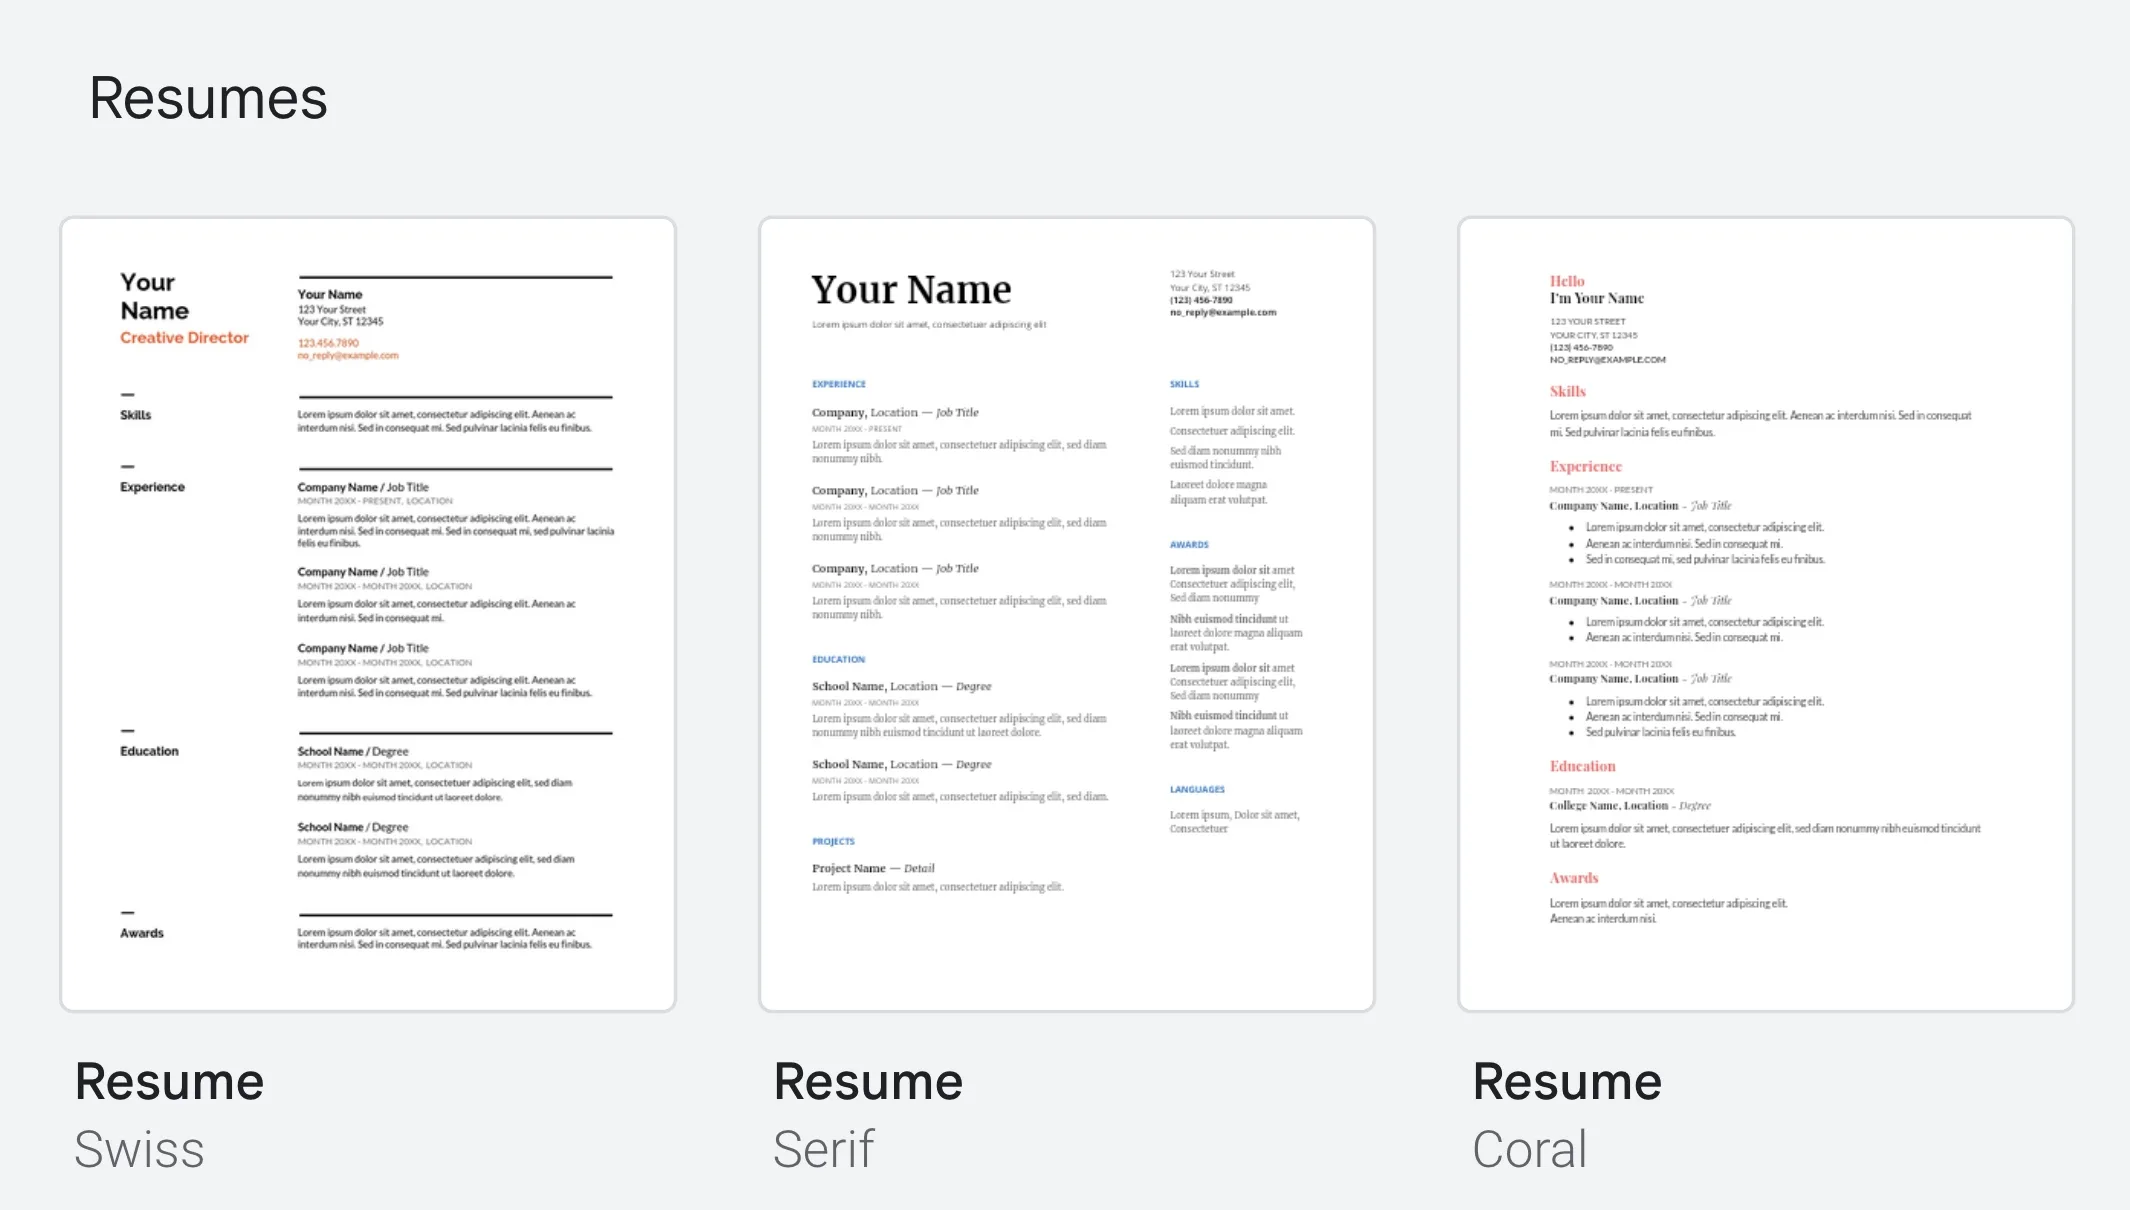 What’s important to know about free Google Docs resume templates